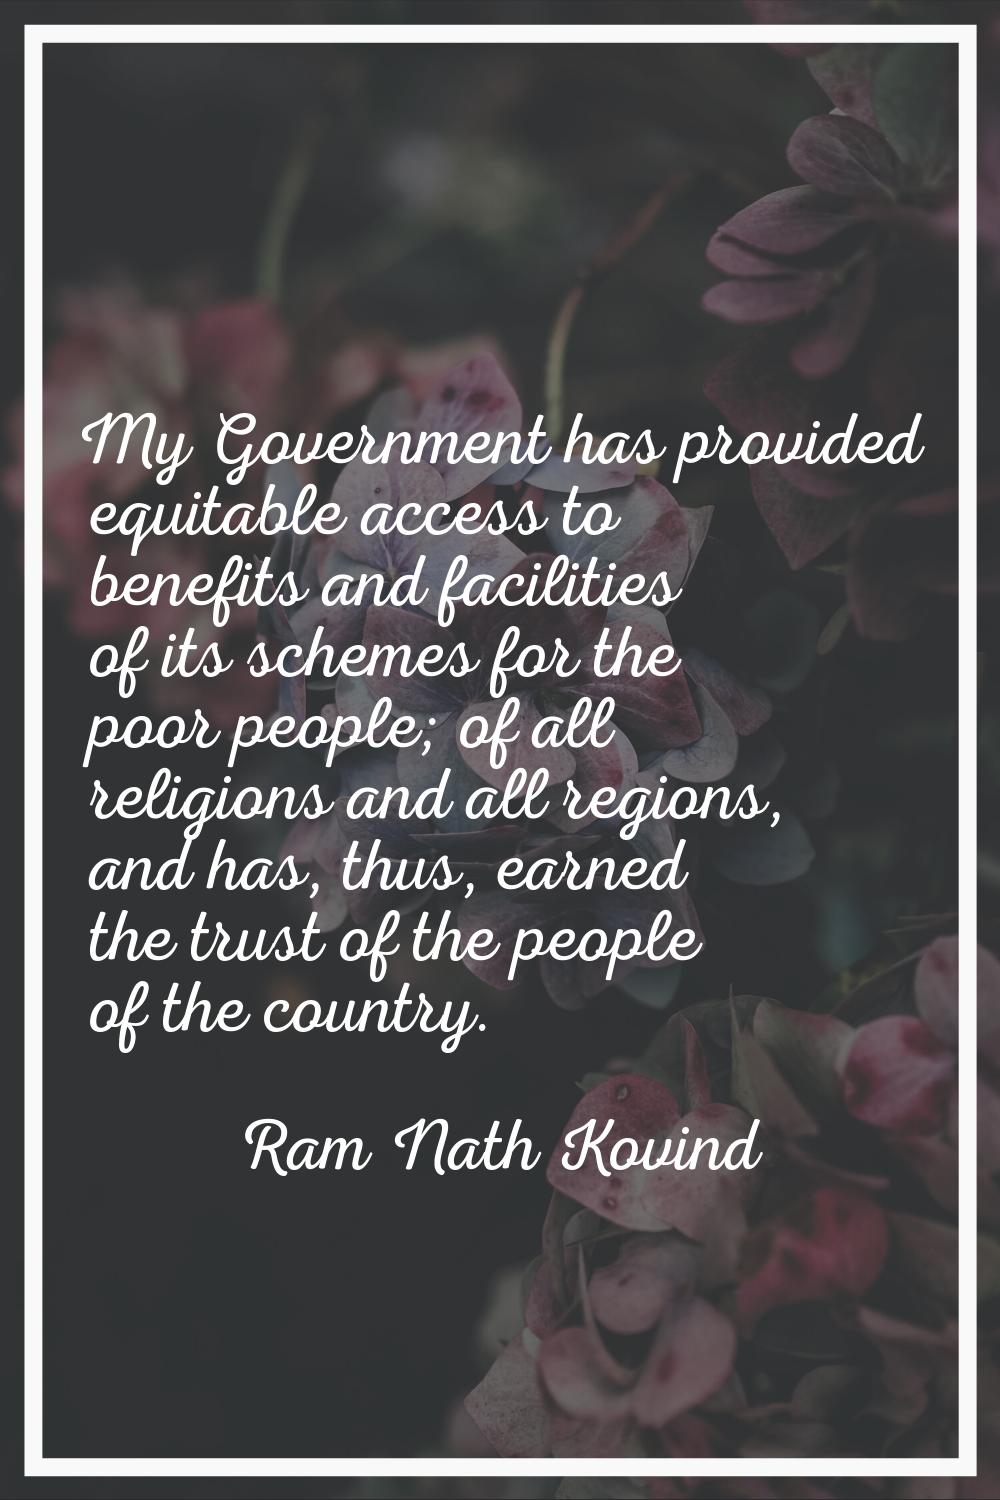 My Government has provided equitable access to benefits and facilities of its schemes for the poor 